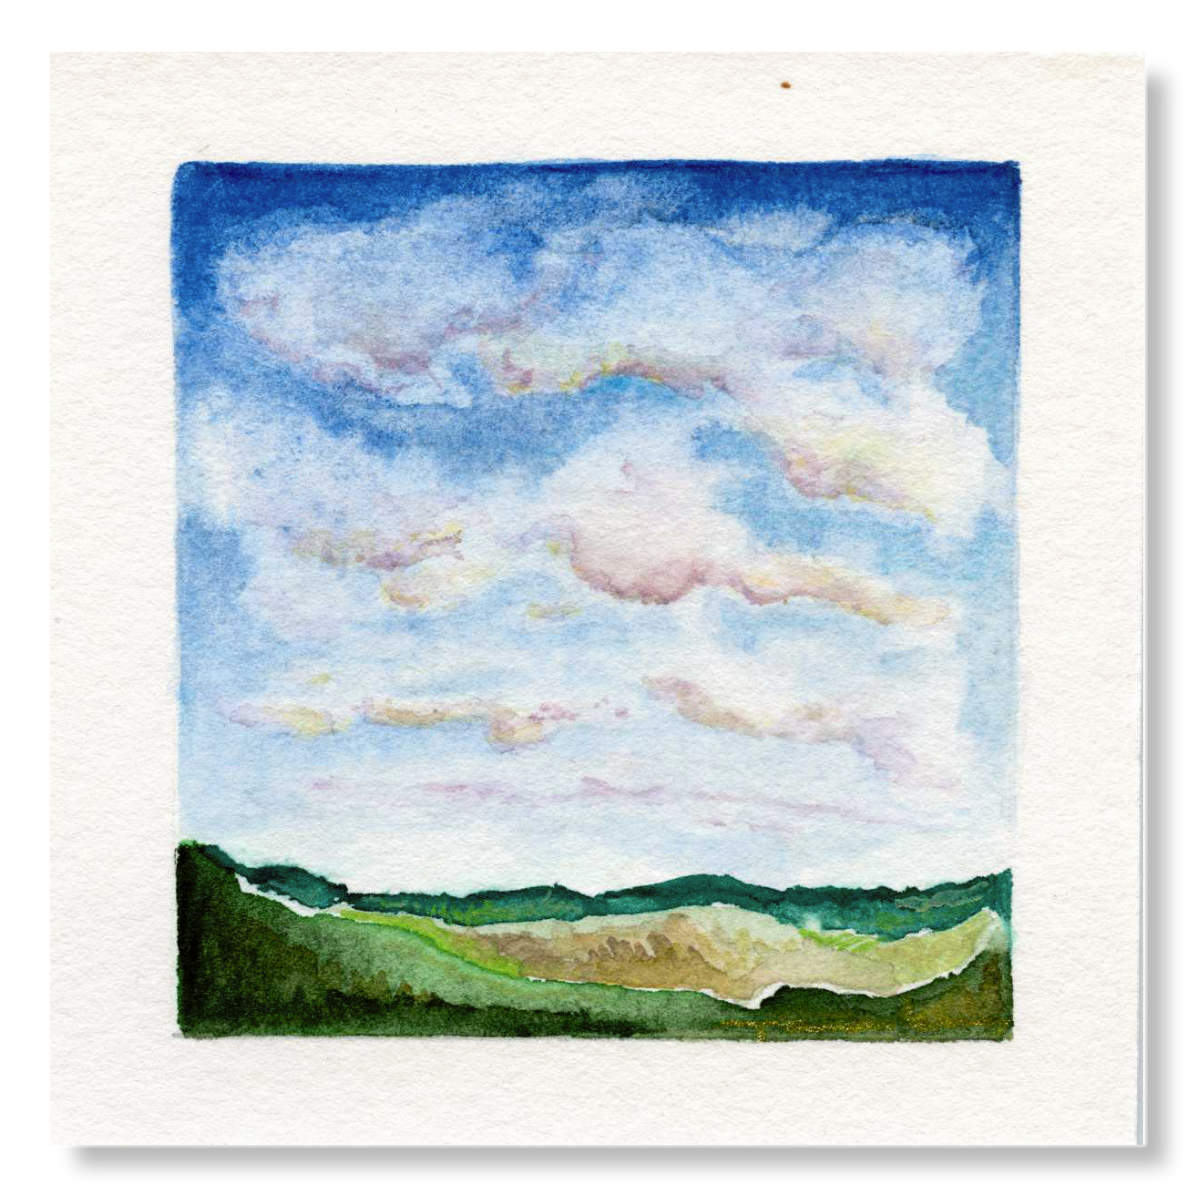 Big Clouds 3 4x4 watercolor on 100% cotton card